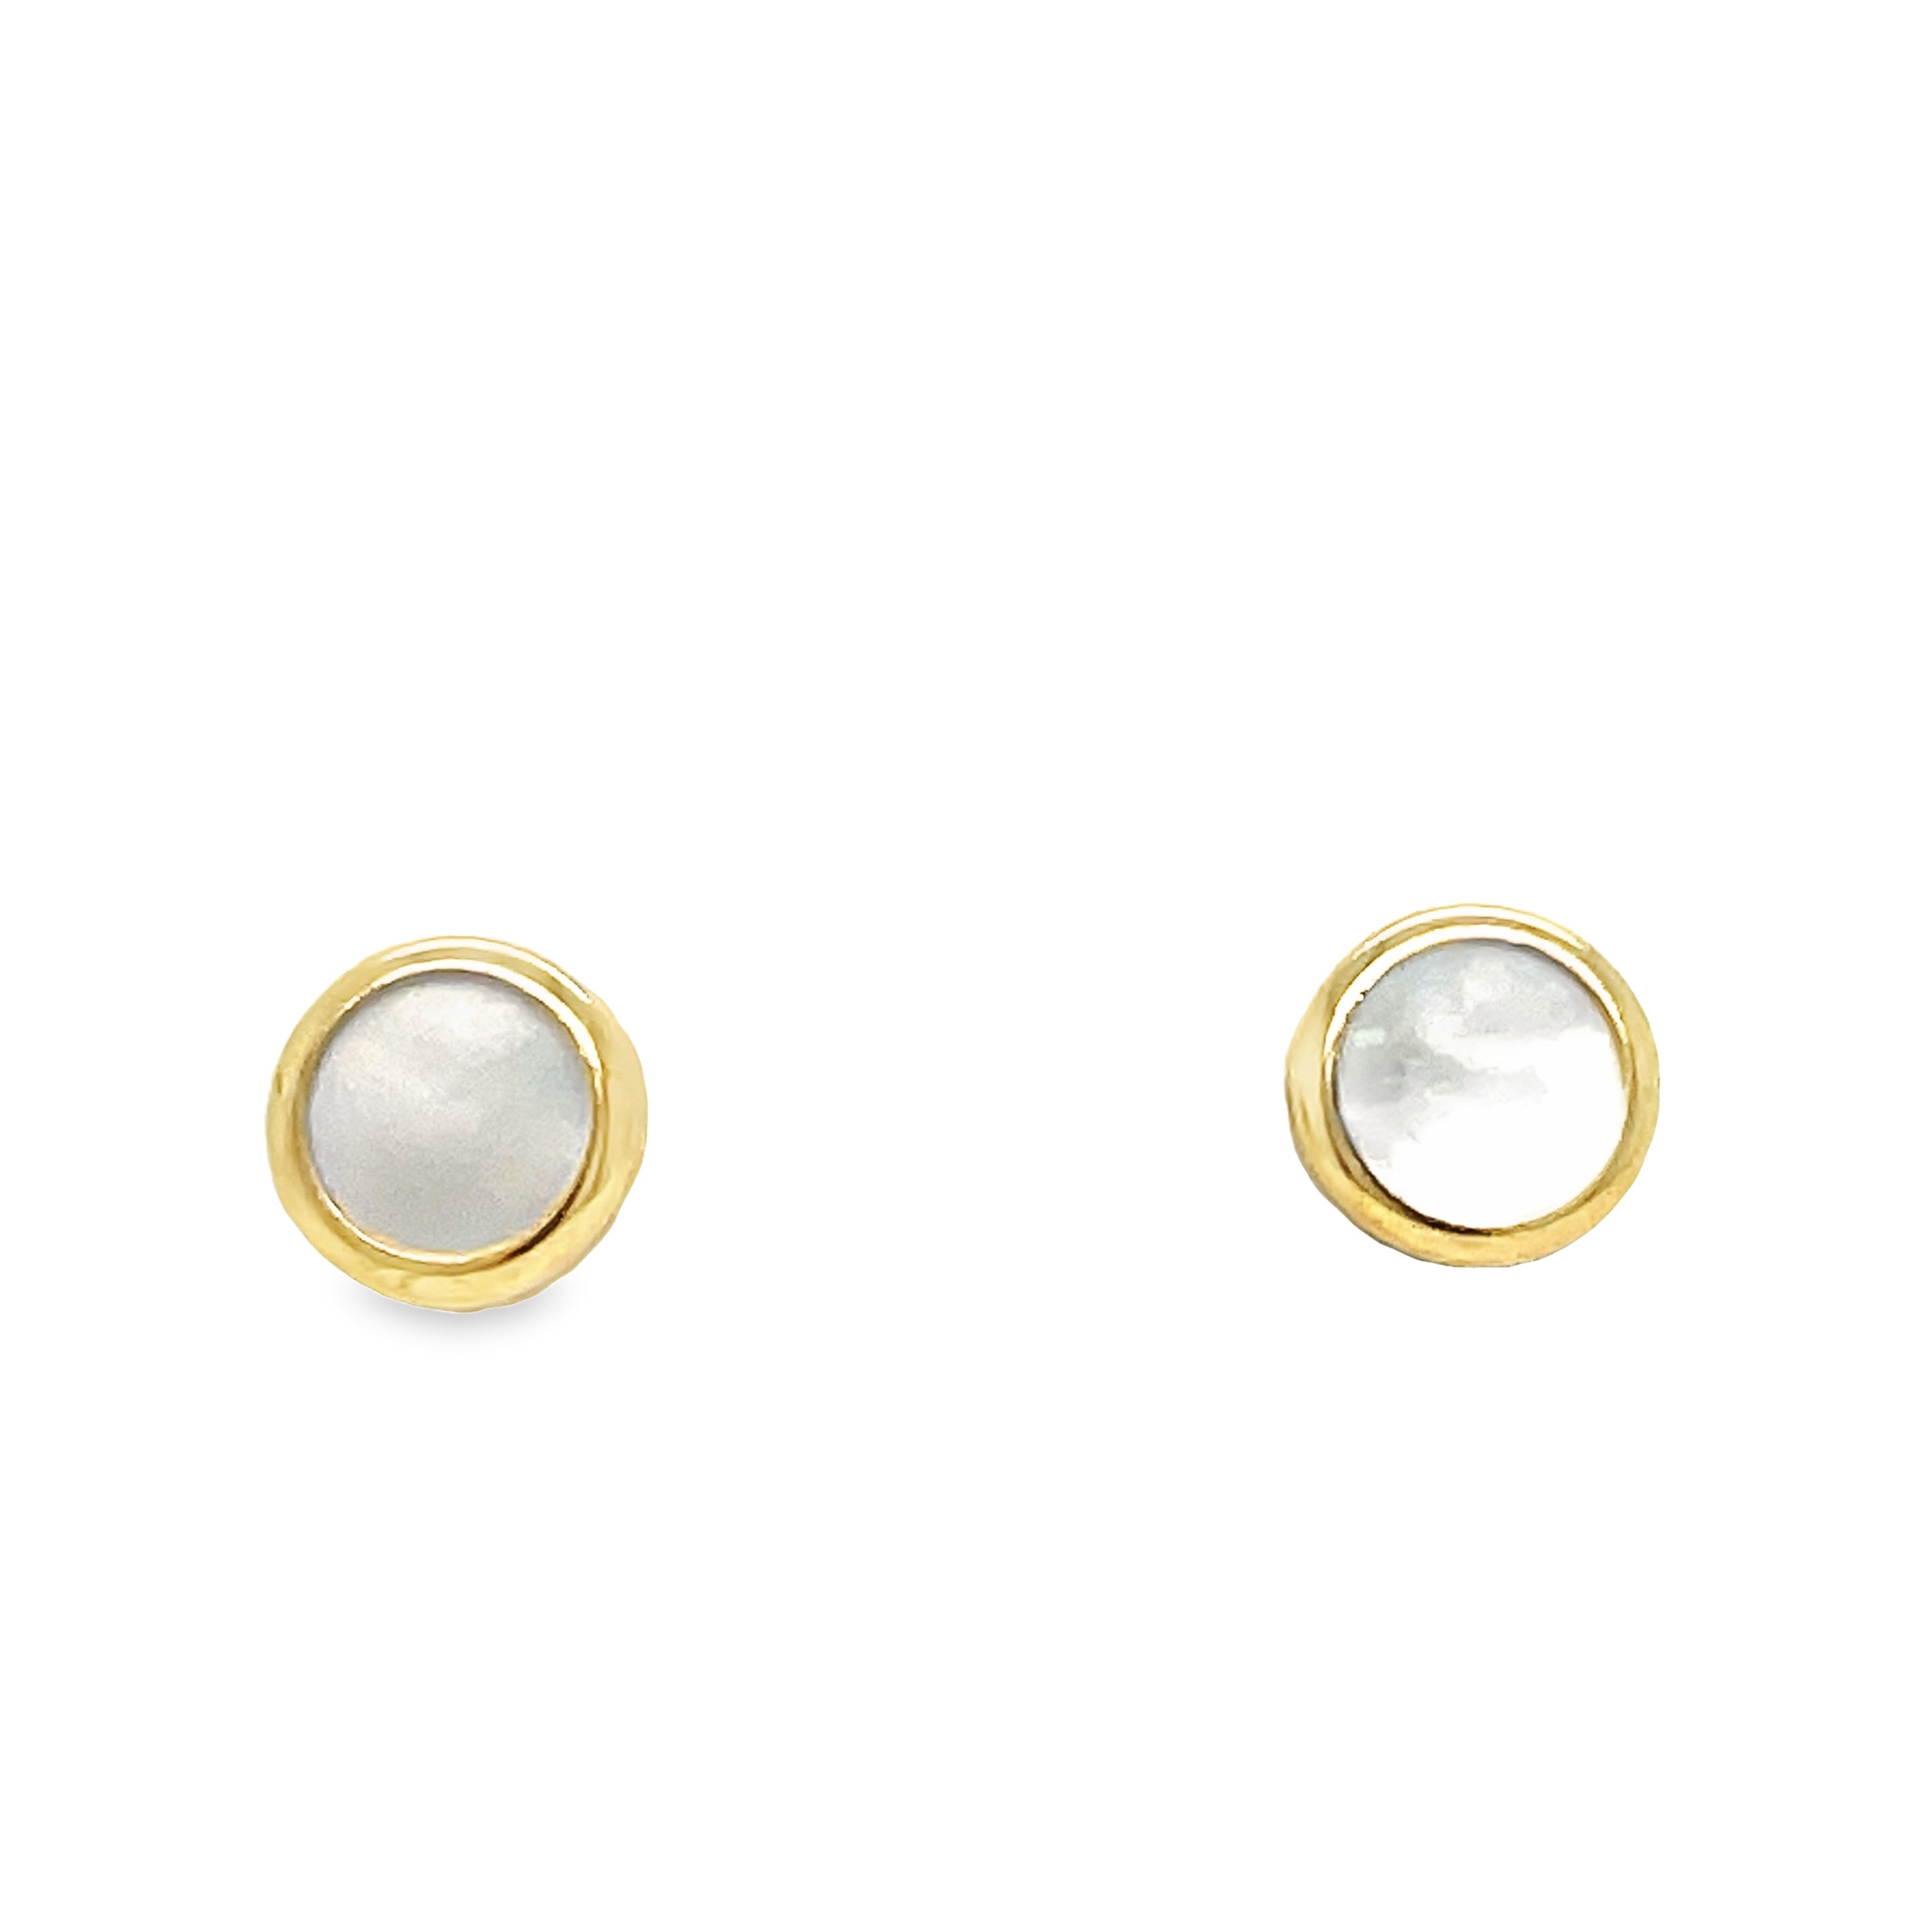 <p><span style="font-size: 0.875rem;">Elegant 14K Yellow Gold mother of pearl flat earrings with secure screw backs. Beautifully crafted earrings provide the perfect finishing touch to any baby's outfit.&nbsp;</span></p> <p>&nbsp;</p>